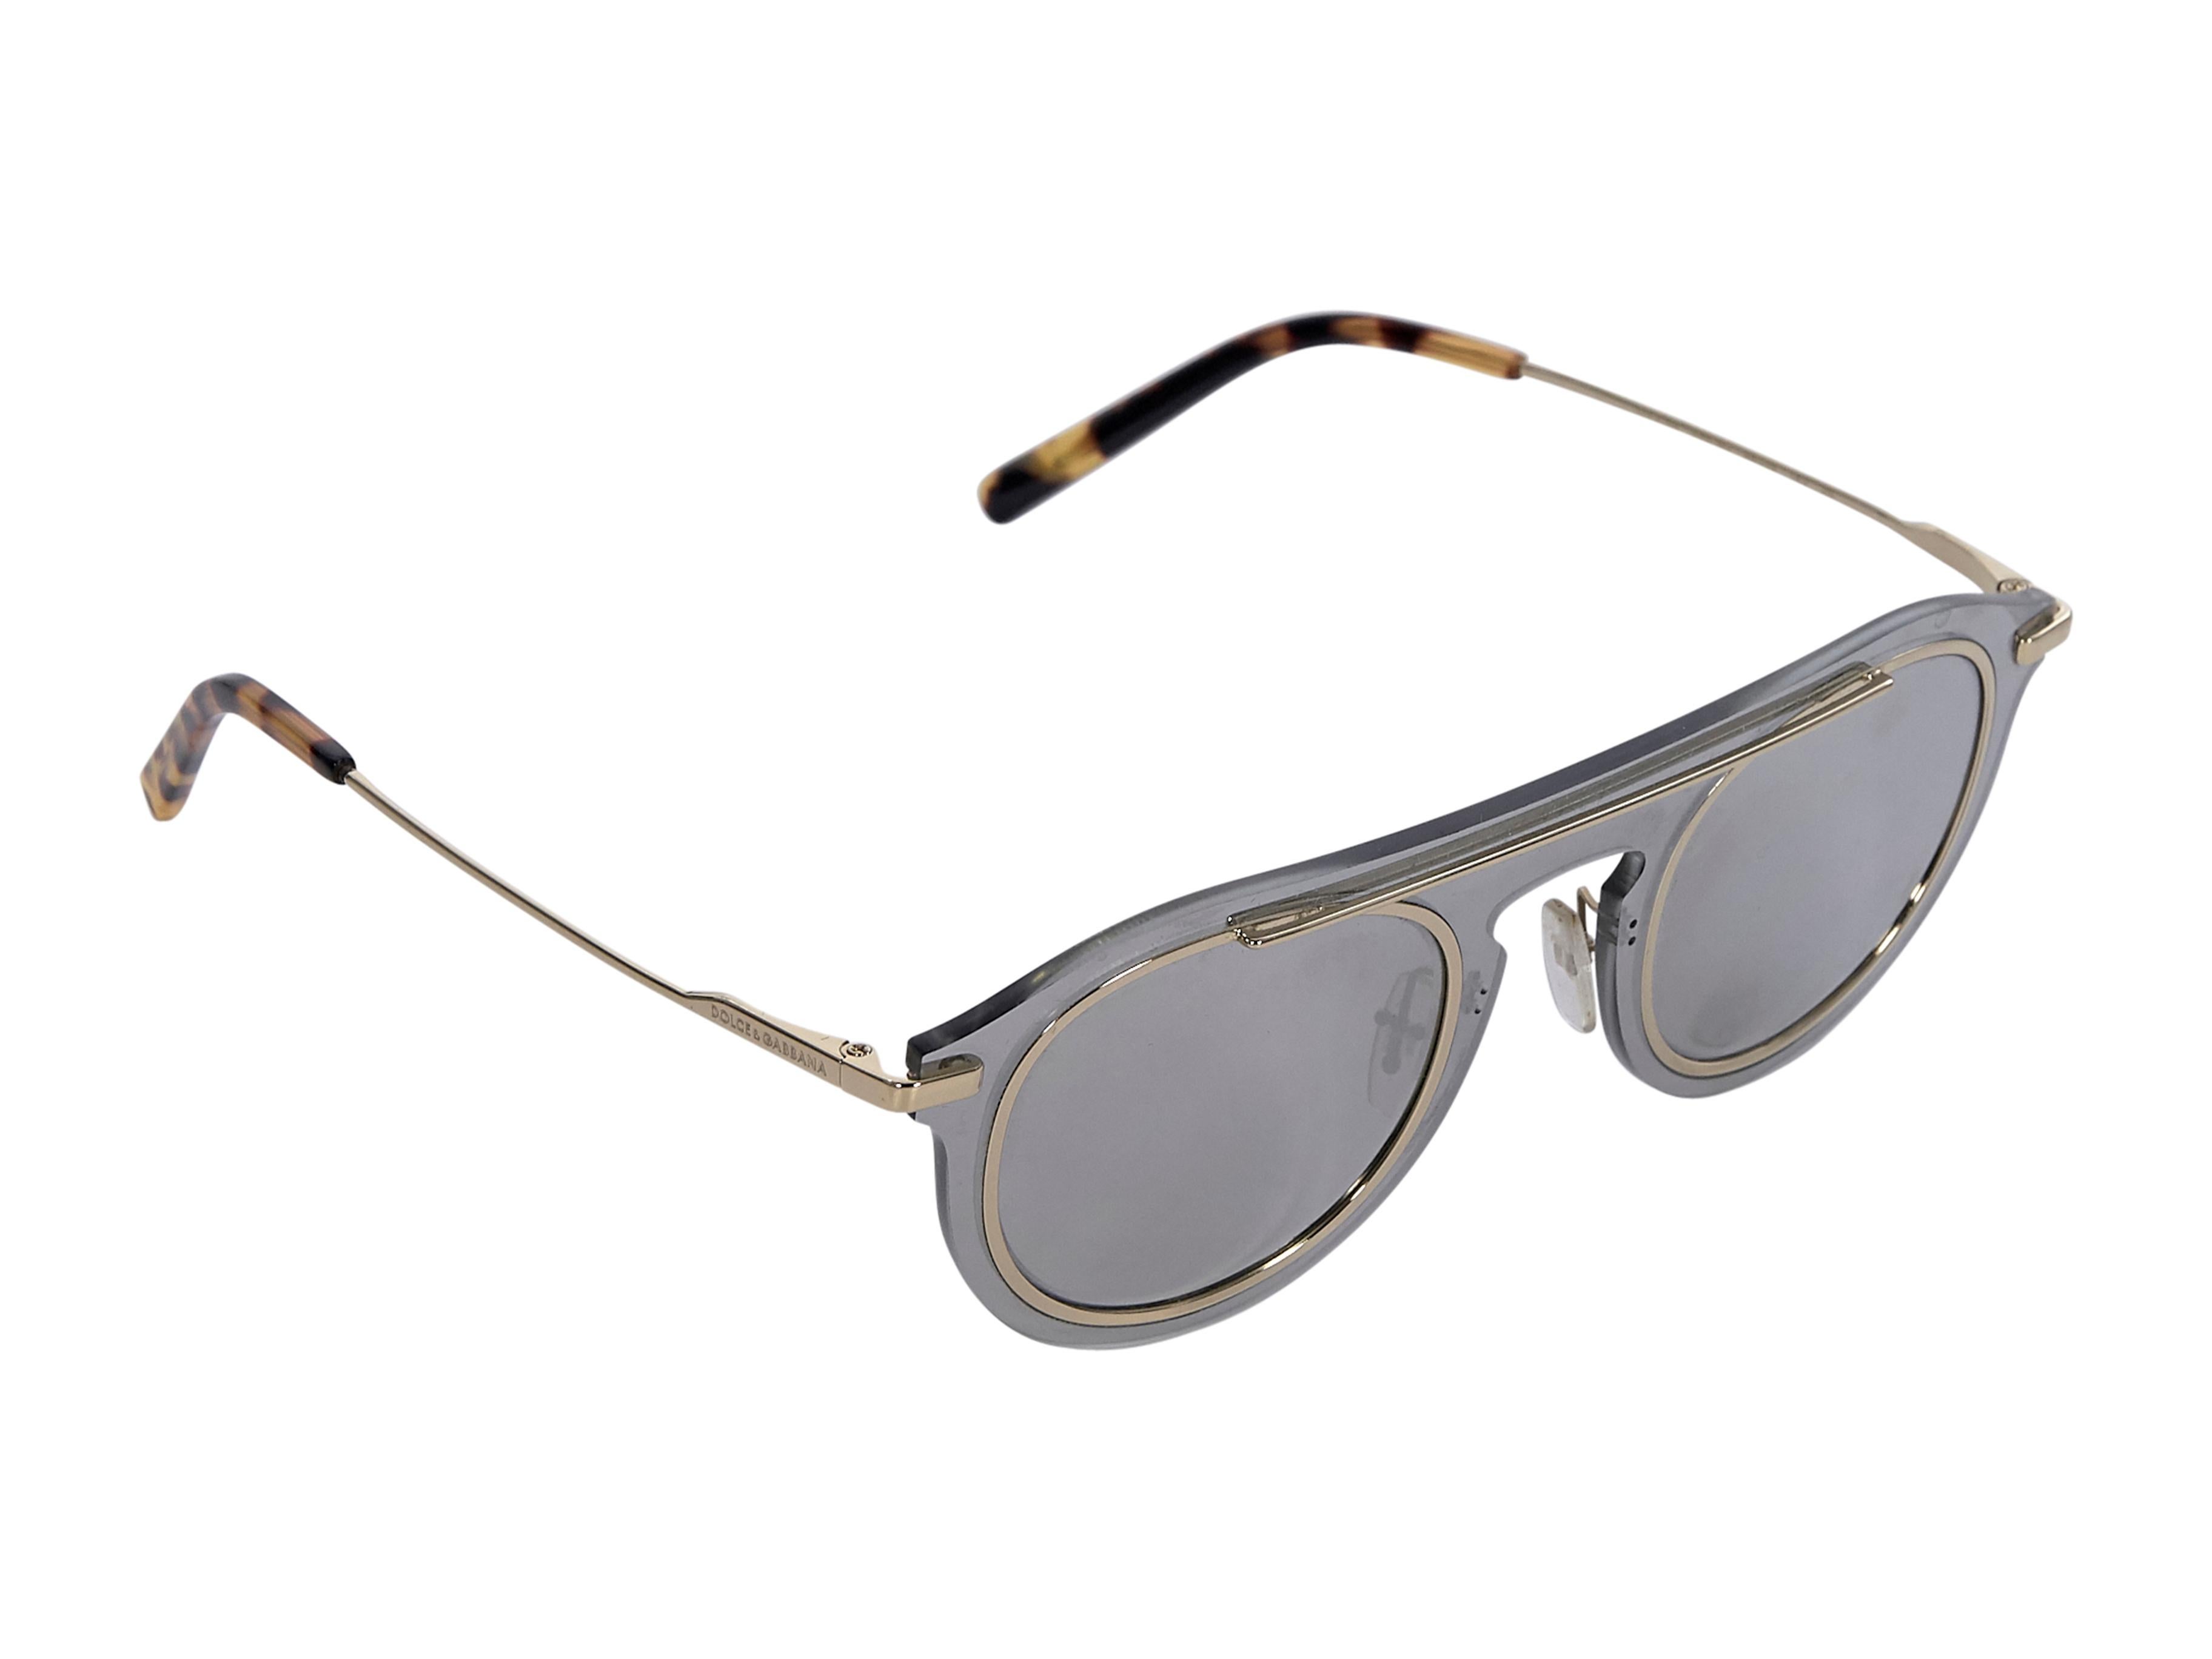 Product details: Grey mirrored aviator sunglasses by Dolce & Gabbana. Gold-tone metal trim. Gold-tone and tortoise-shell stems. Style yours with a metallic knit swimsuit. Case included. 6.5